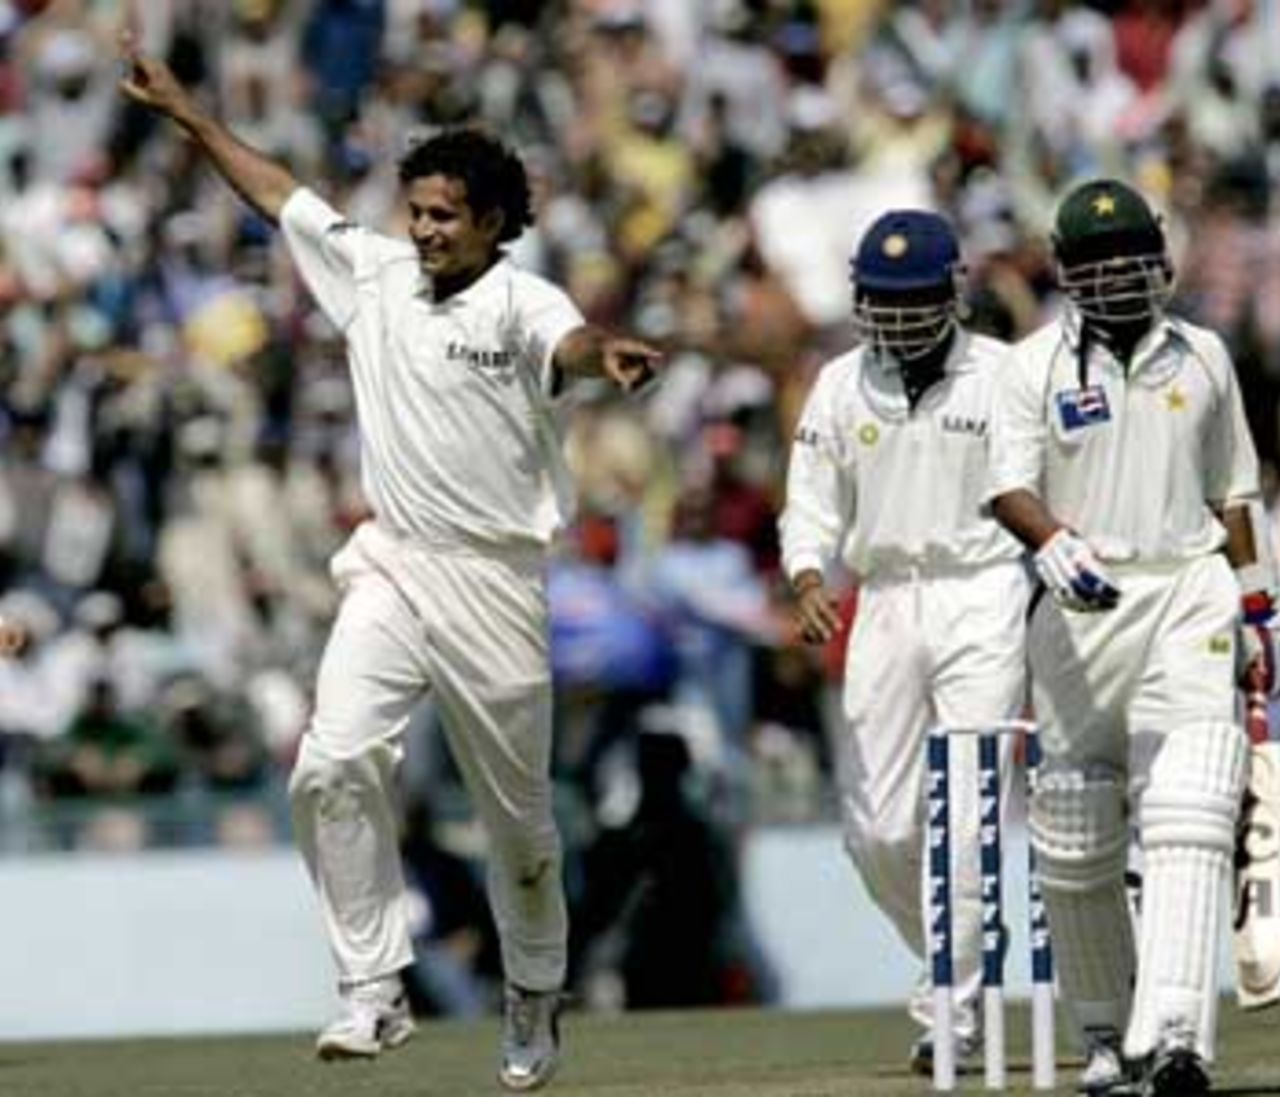 Yousuf Youhana fell yet again to Irfan Pathan, India v Pakistan, 1st Test, Mohali, March 8, 2005